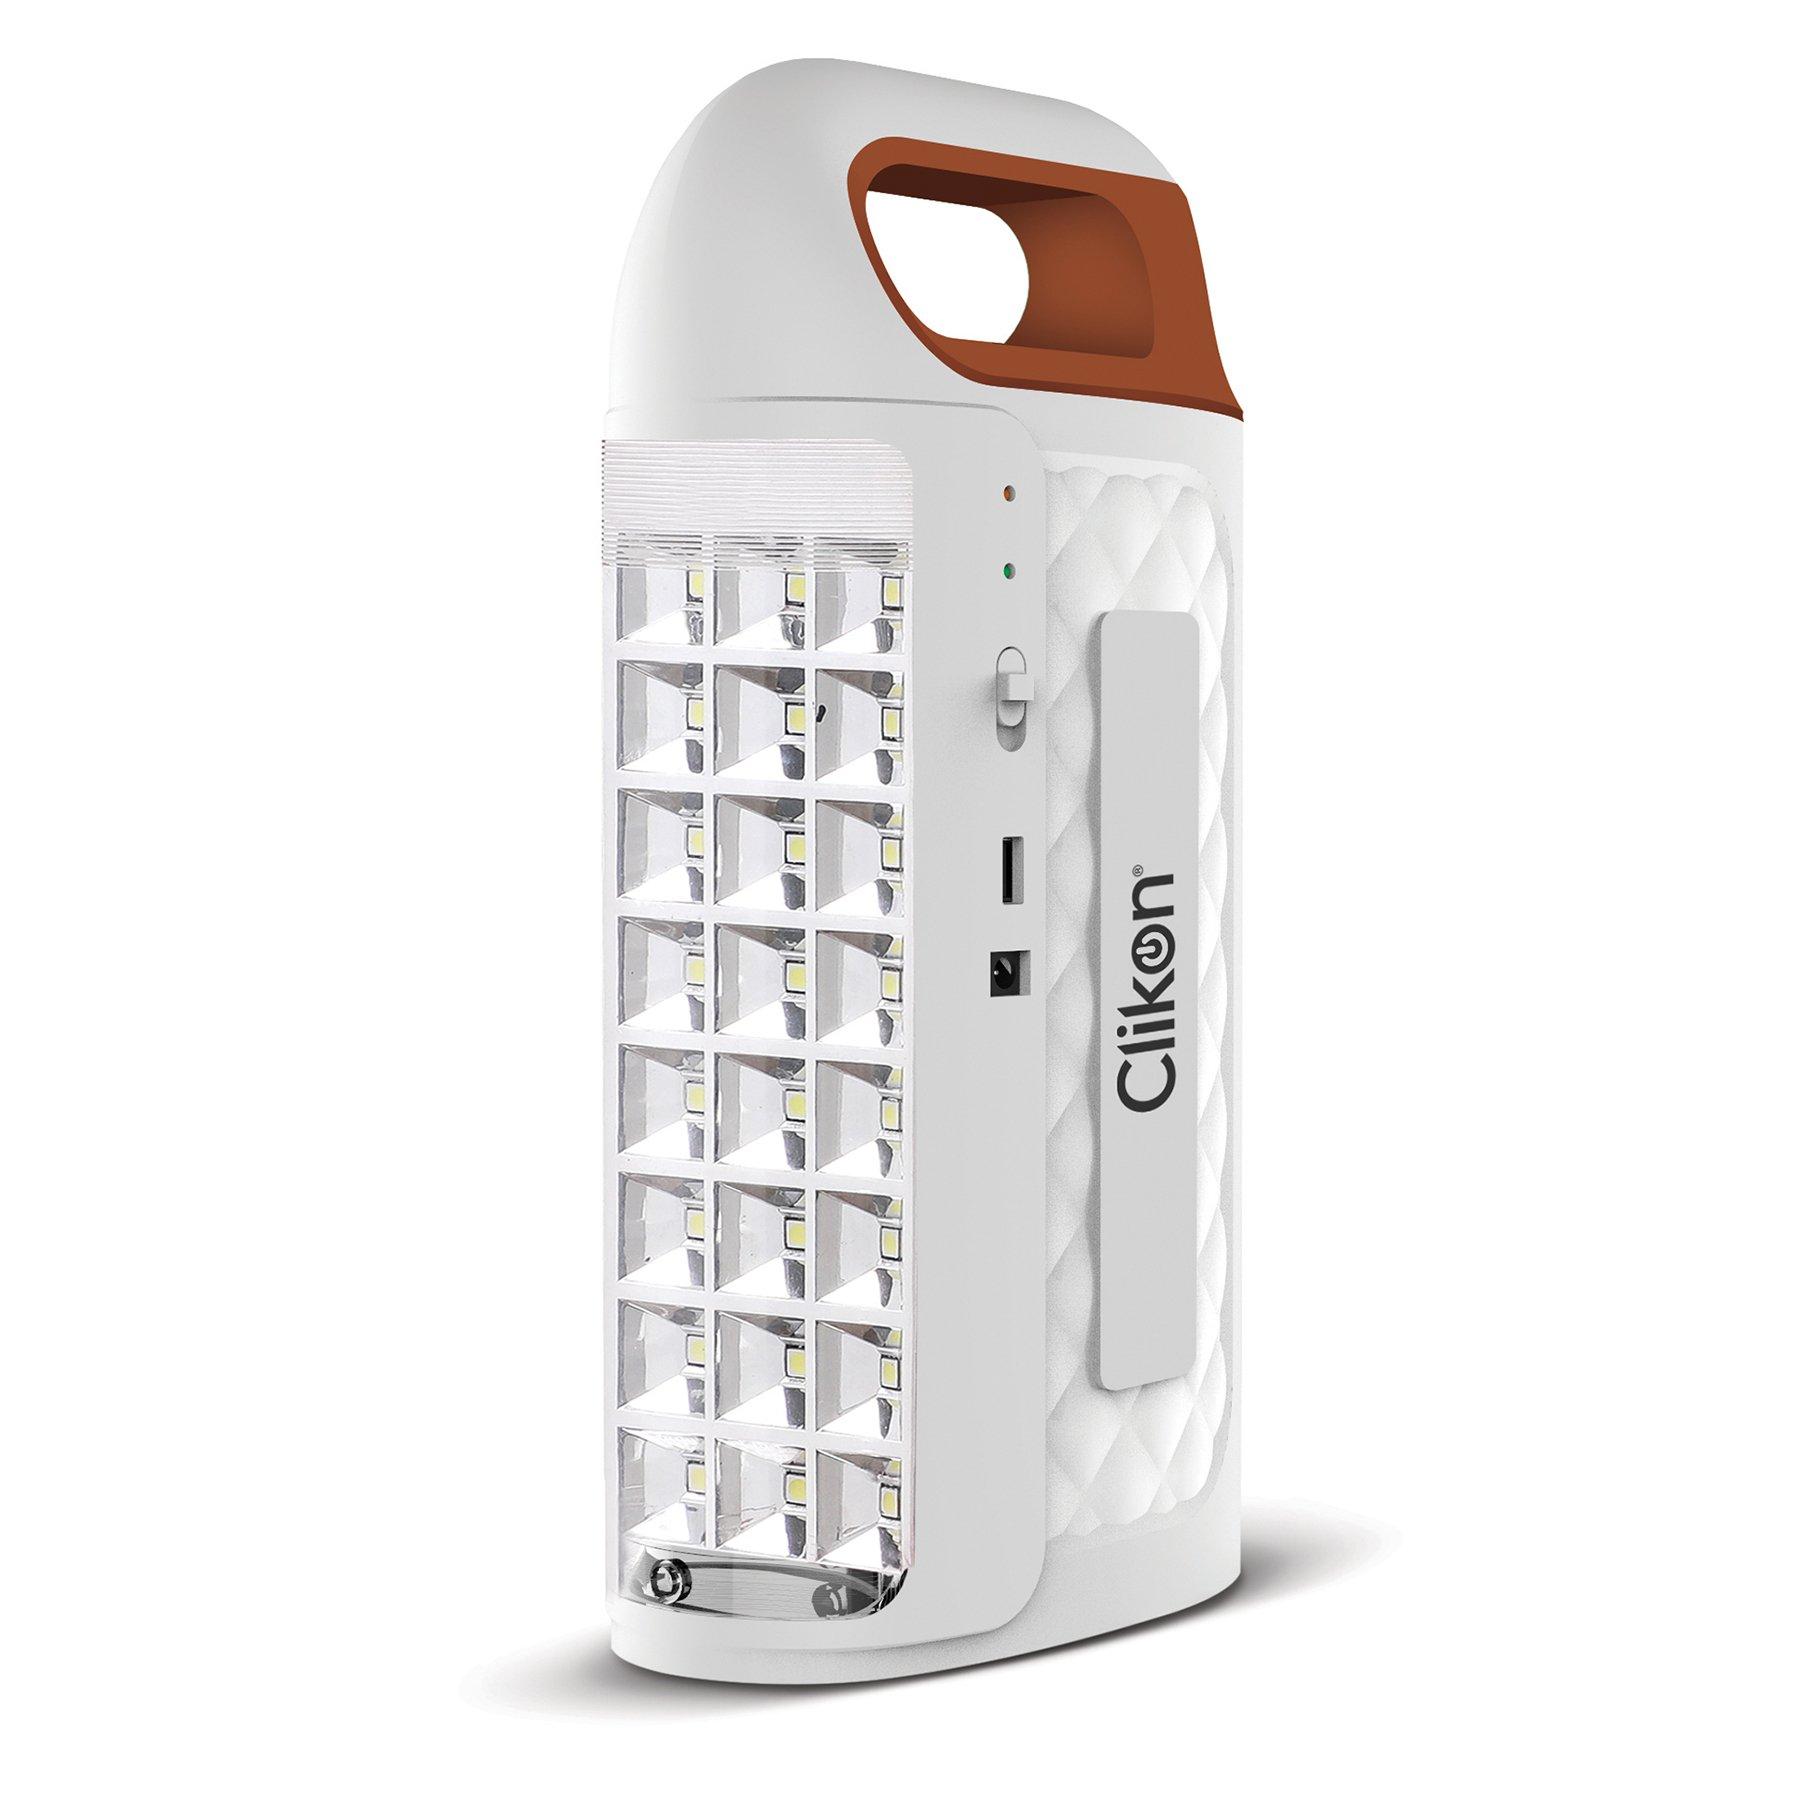 https://media.extra.com/s/aurora/100317551_800/Clikon-Rechargeable-LED-Emergency-Light-With-USB-Port-6V-4500mAh-Brown-White?locale=en-GB,en-*,*&$Listing-Product-2x$